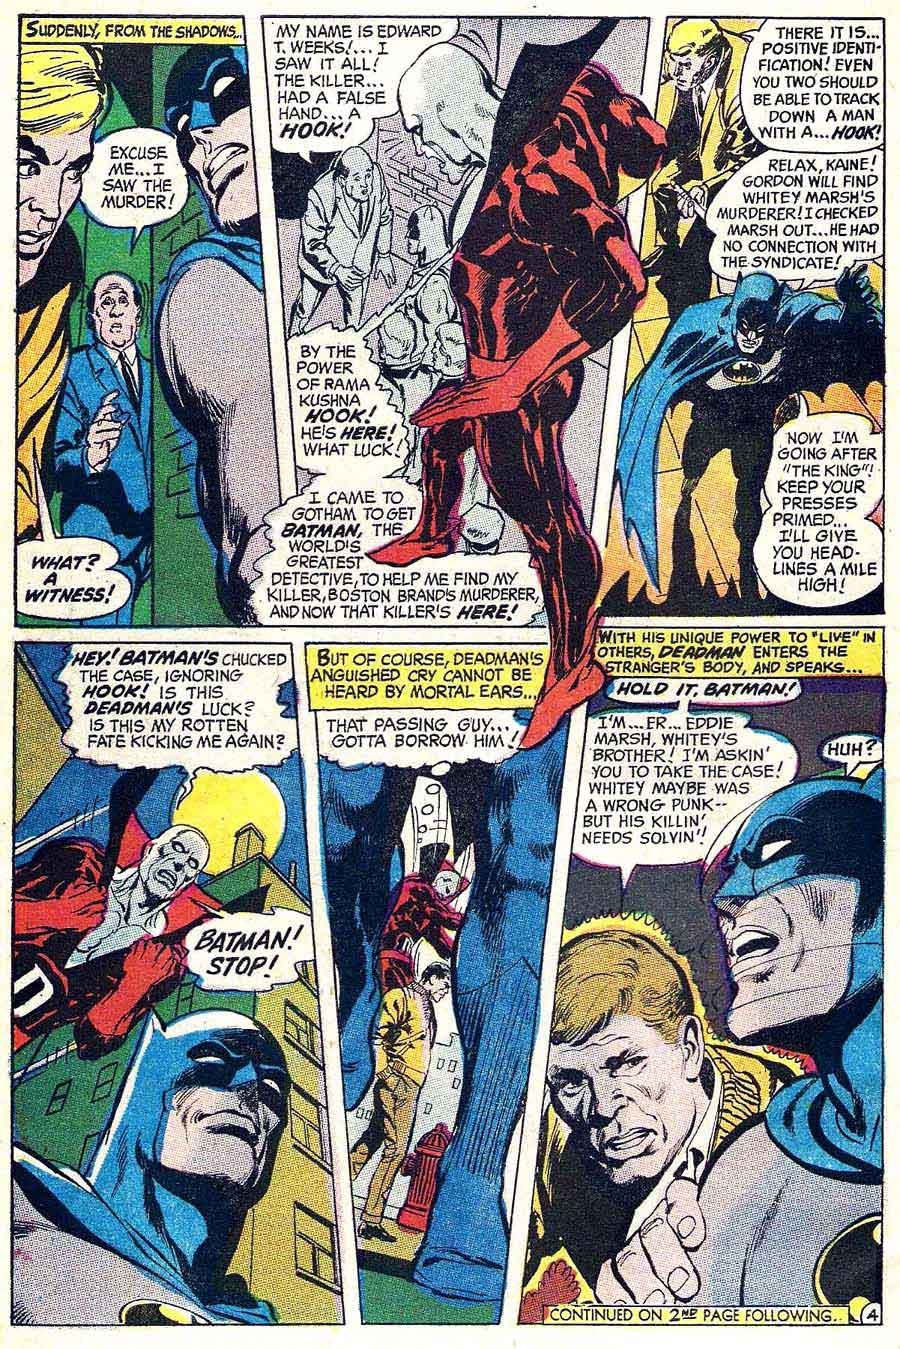 Brave and the Bold v1 #79 deadman dc comic book page art by Neal Adams